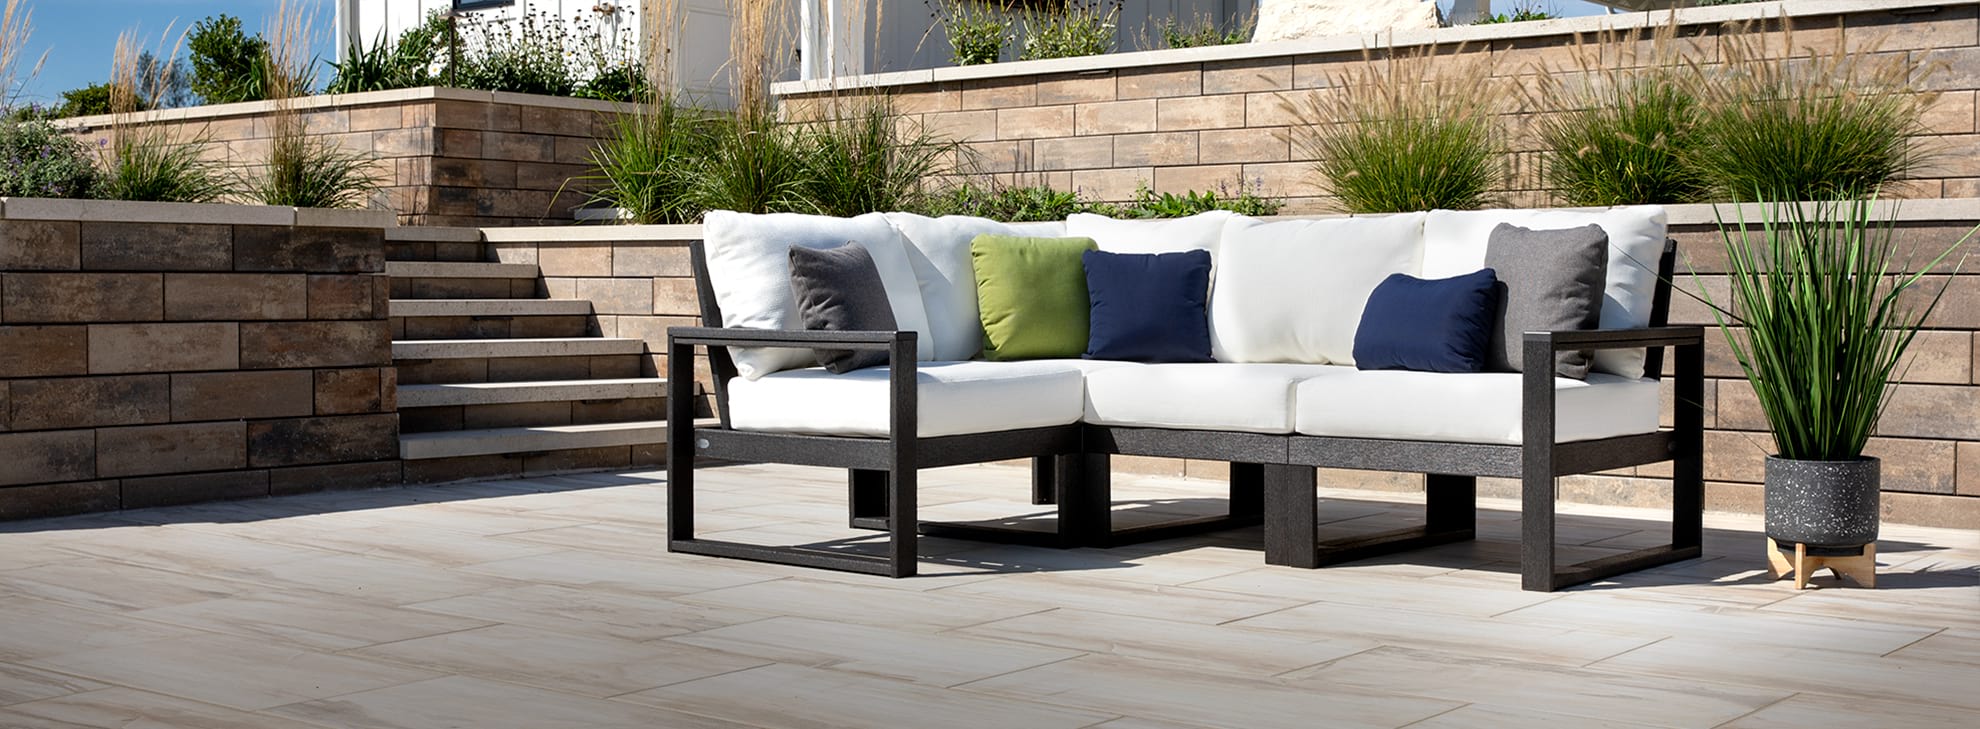 Polywood outdoor furniture 